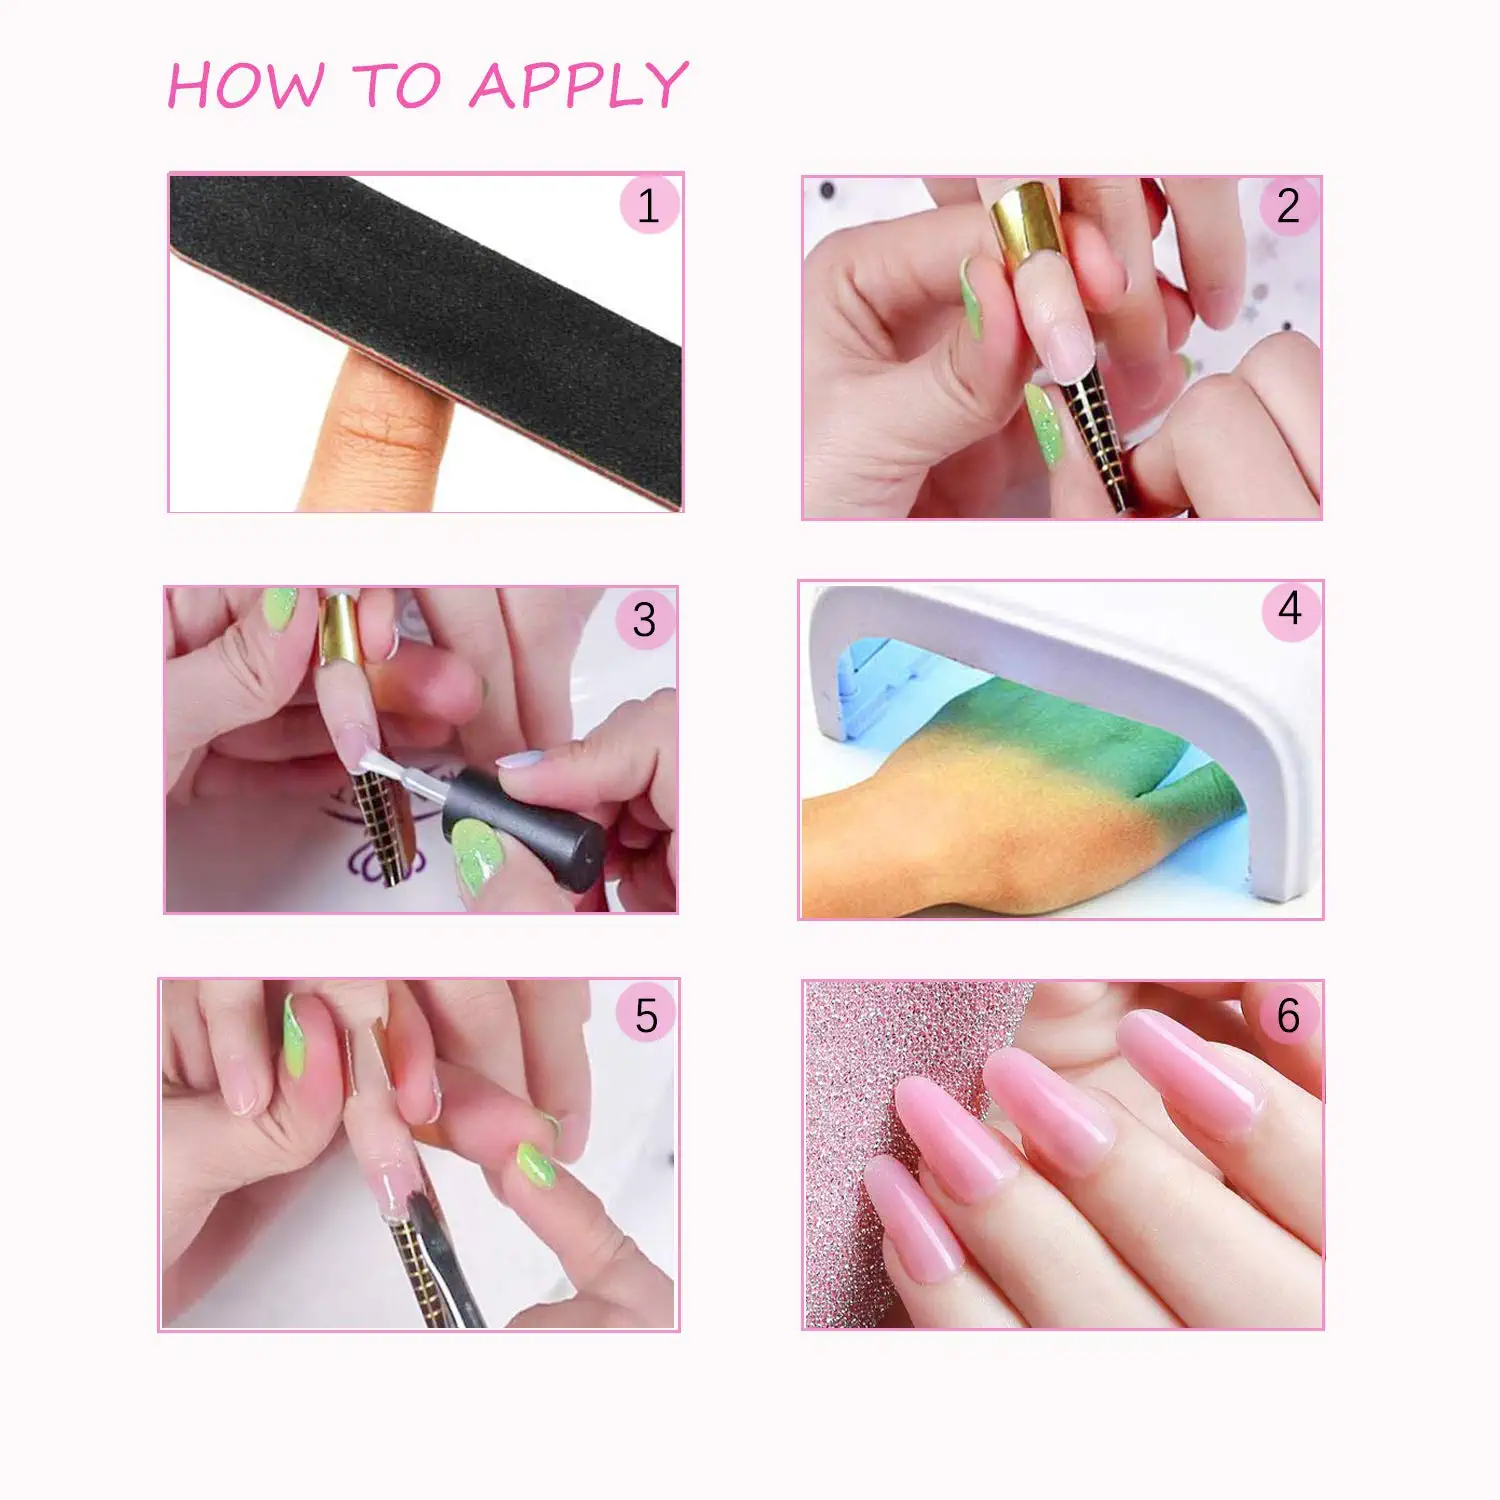 Don't Let Gel Polish Make Your Nails Look Thick 🥴Try This - YouTube